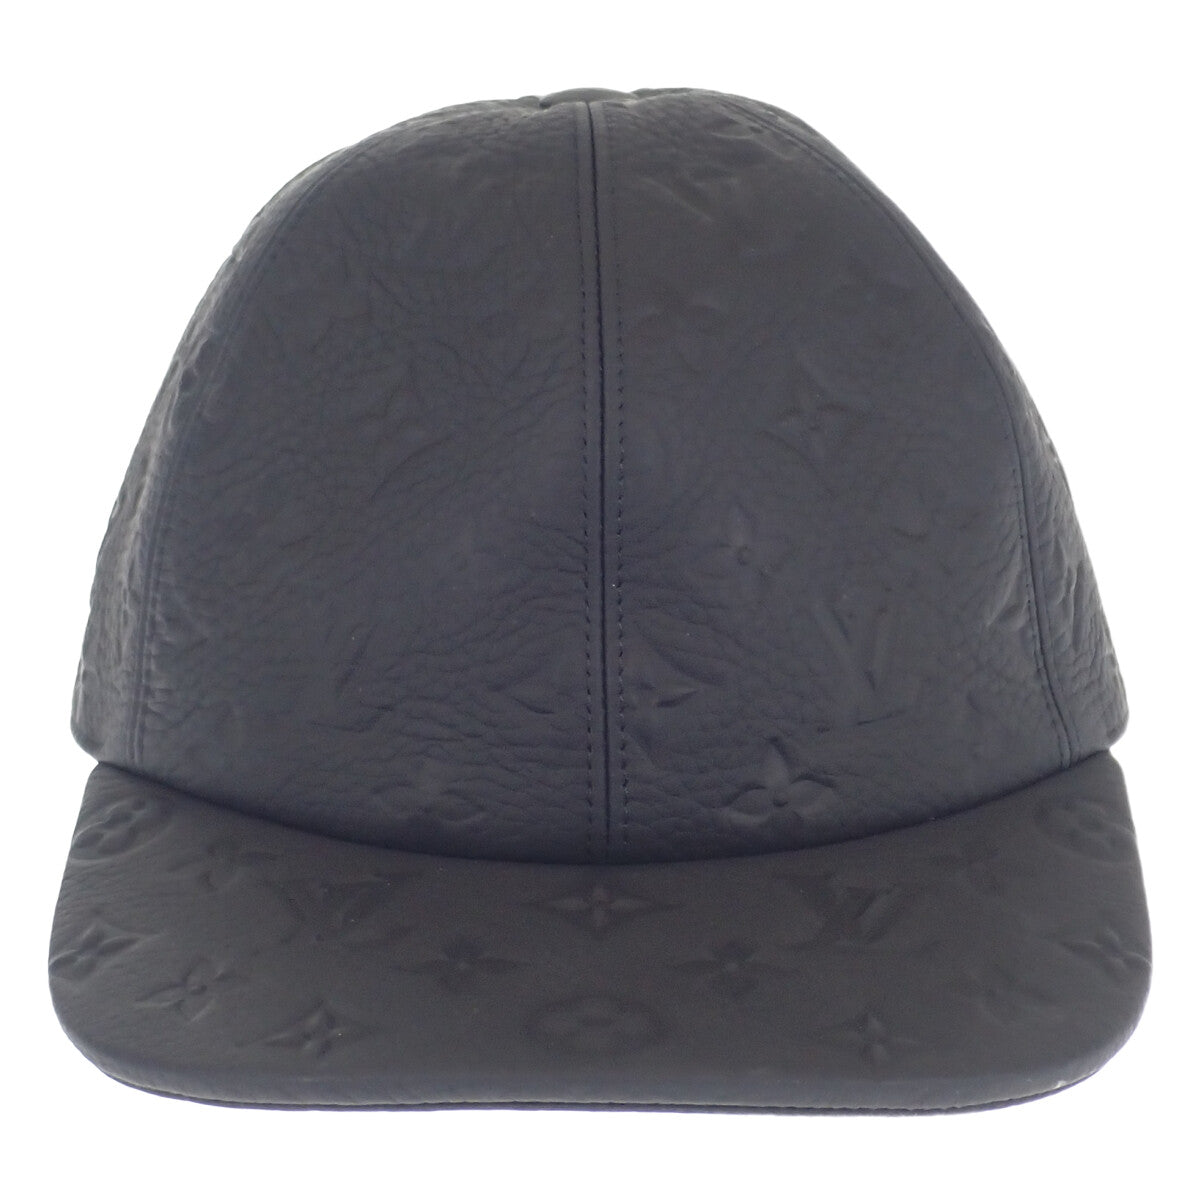 Louis Vuitton Casquette 1.1 Monogram Leather Other MP2605 in Good condition